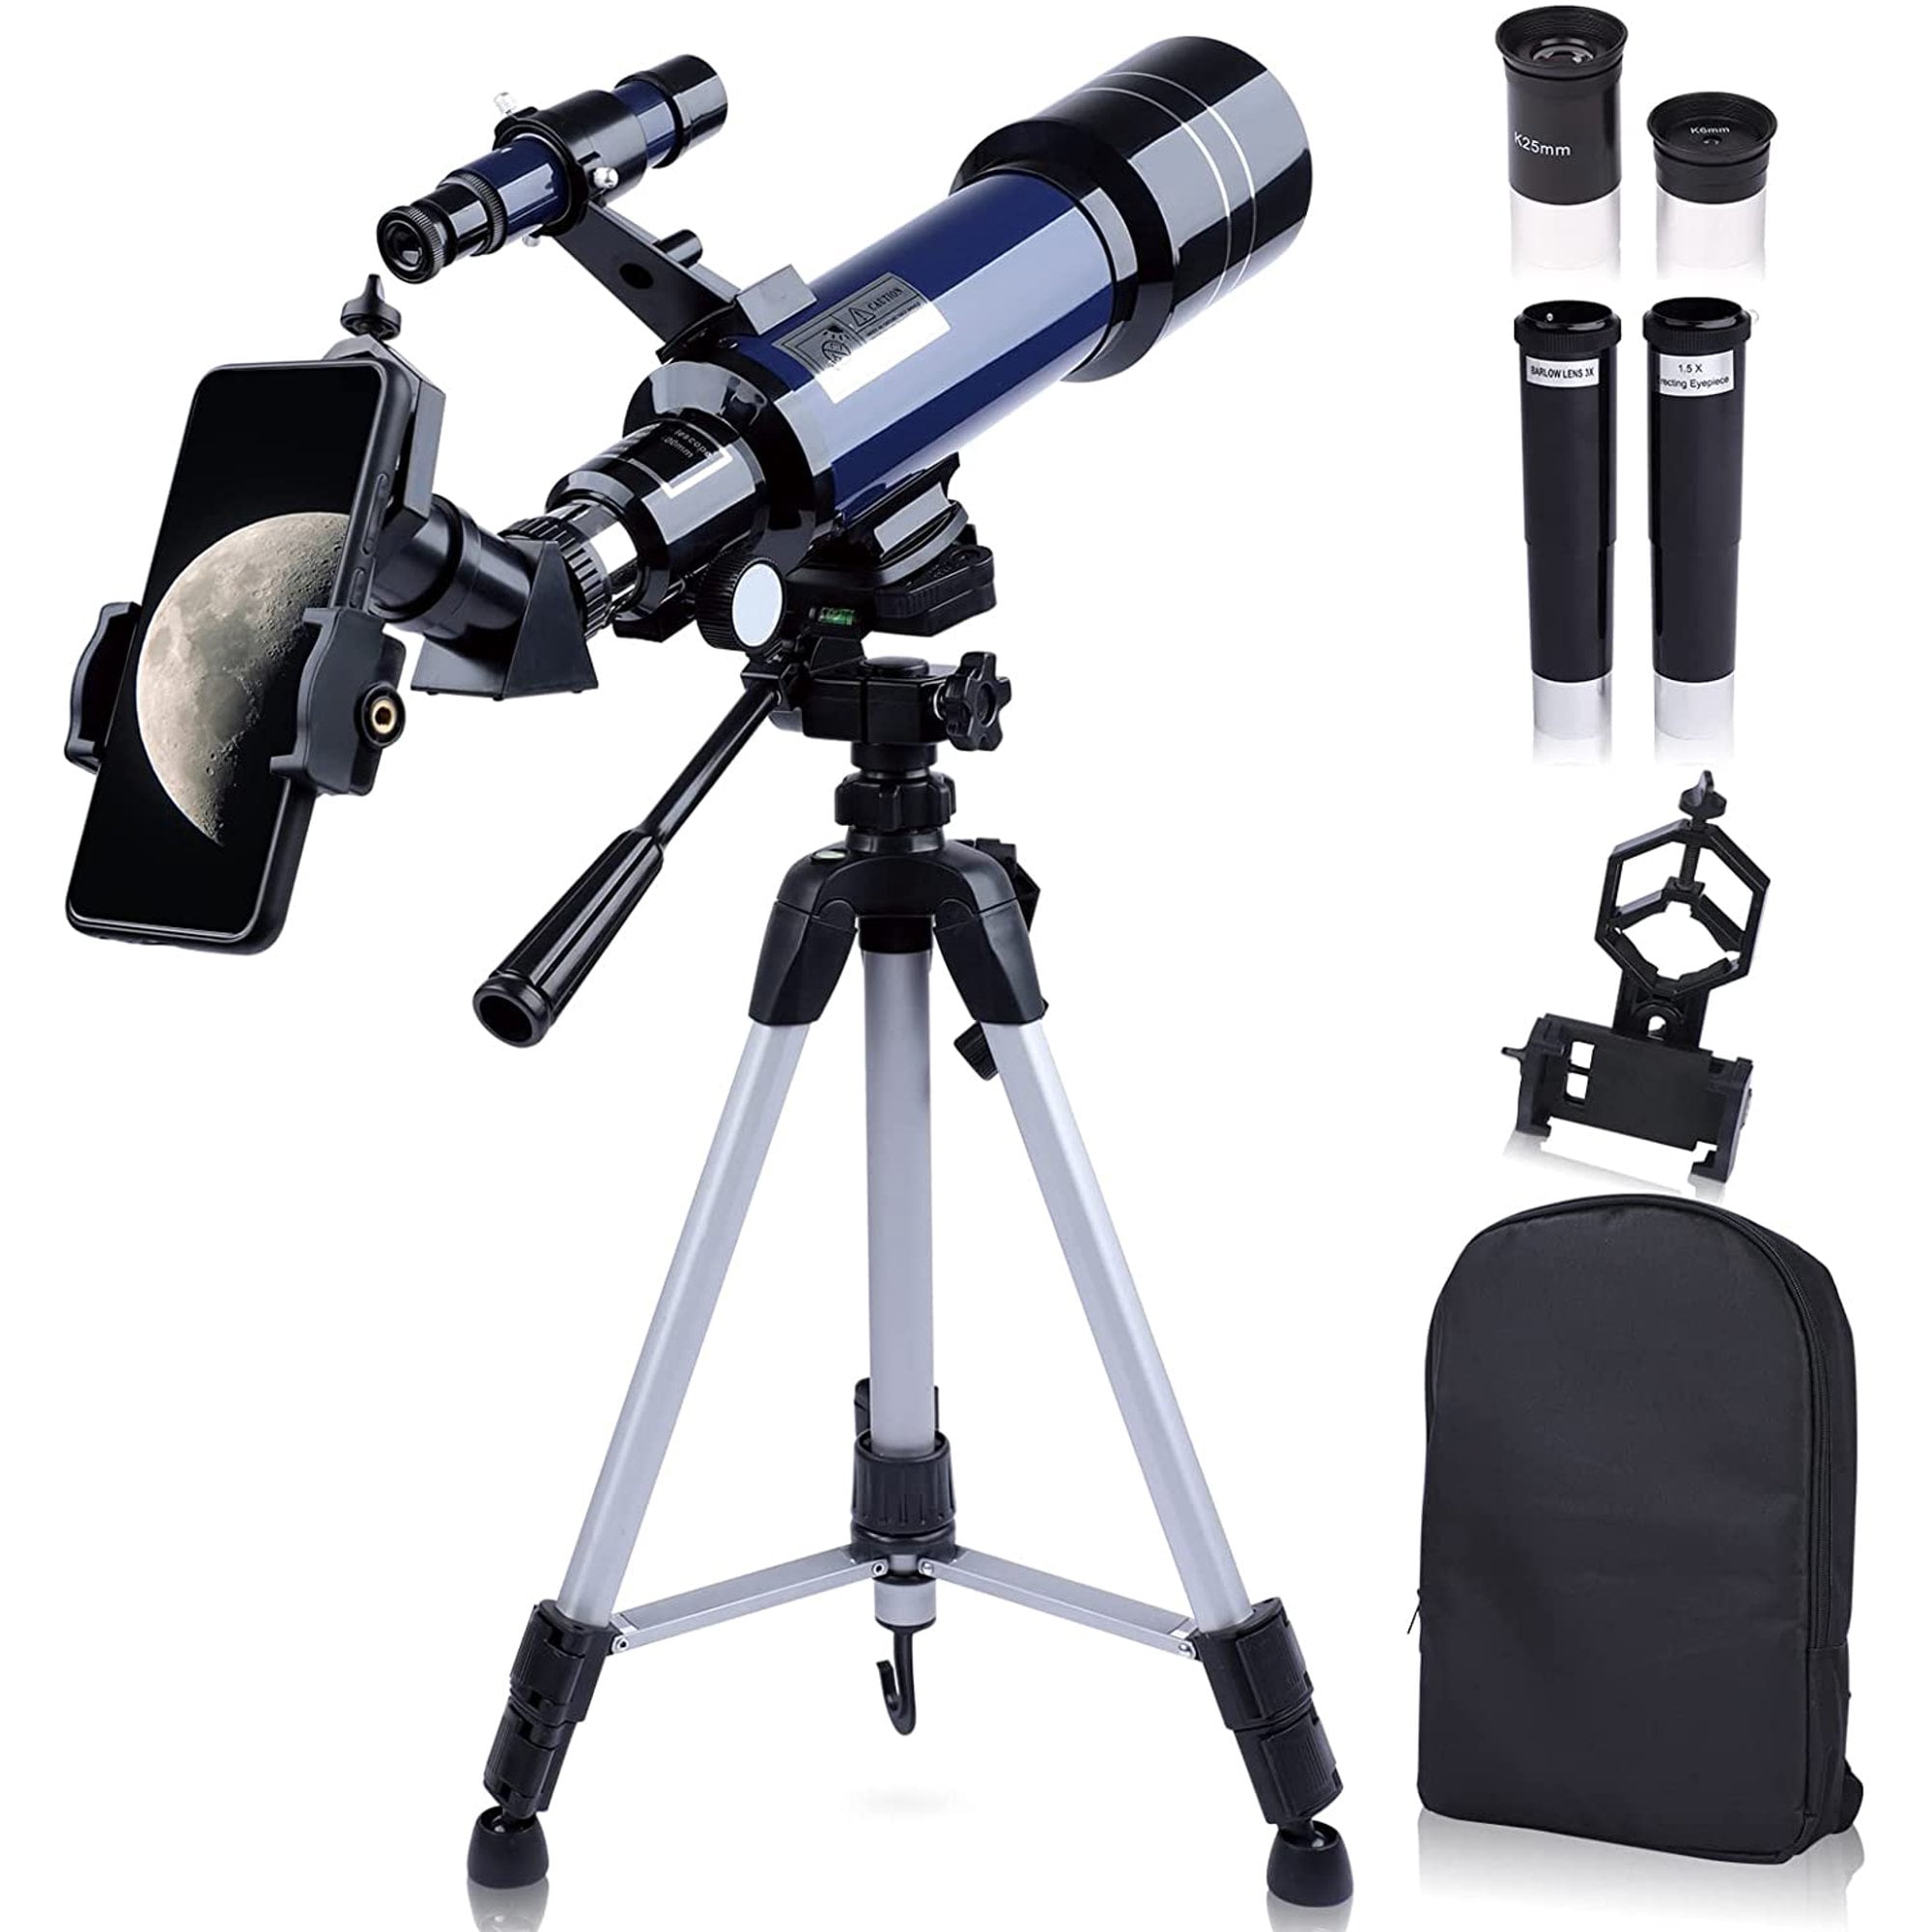 High Resolution Telescope with Tripod Telescopes for Adults Astronomy Professional Astronomy Beginners Gifts Astronomical Refracting Telescope Travel Telescope with 2X Magnification Eyepieces 